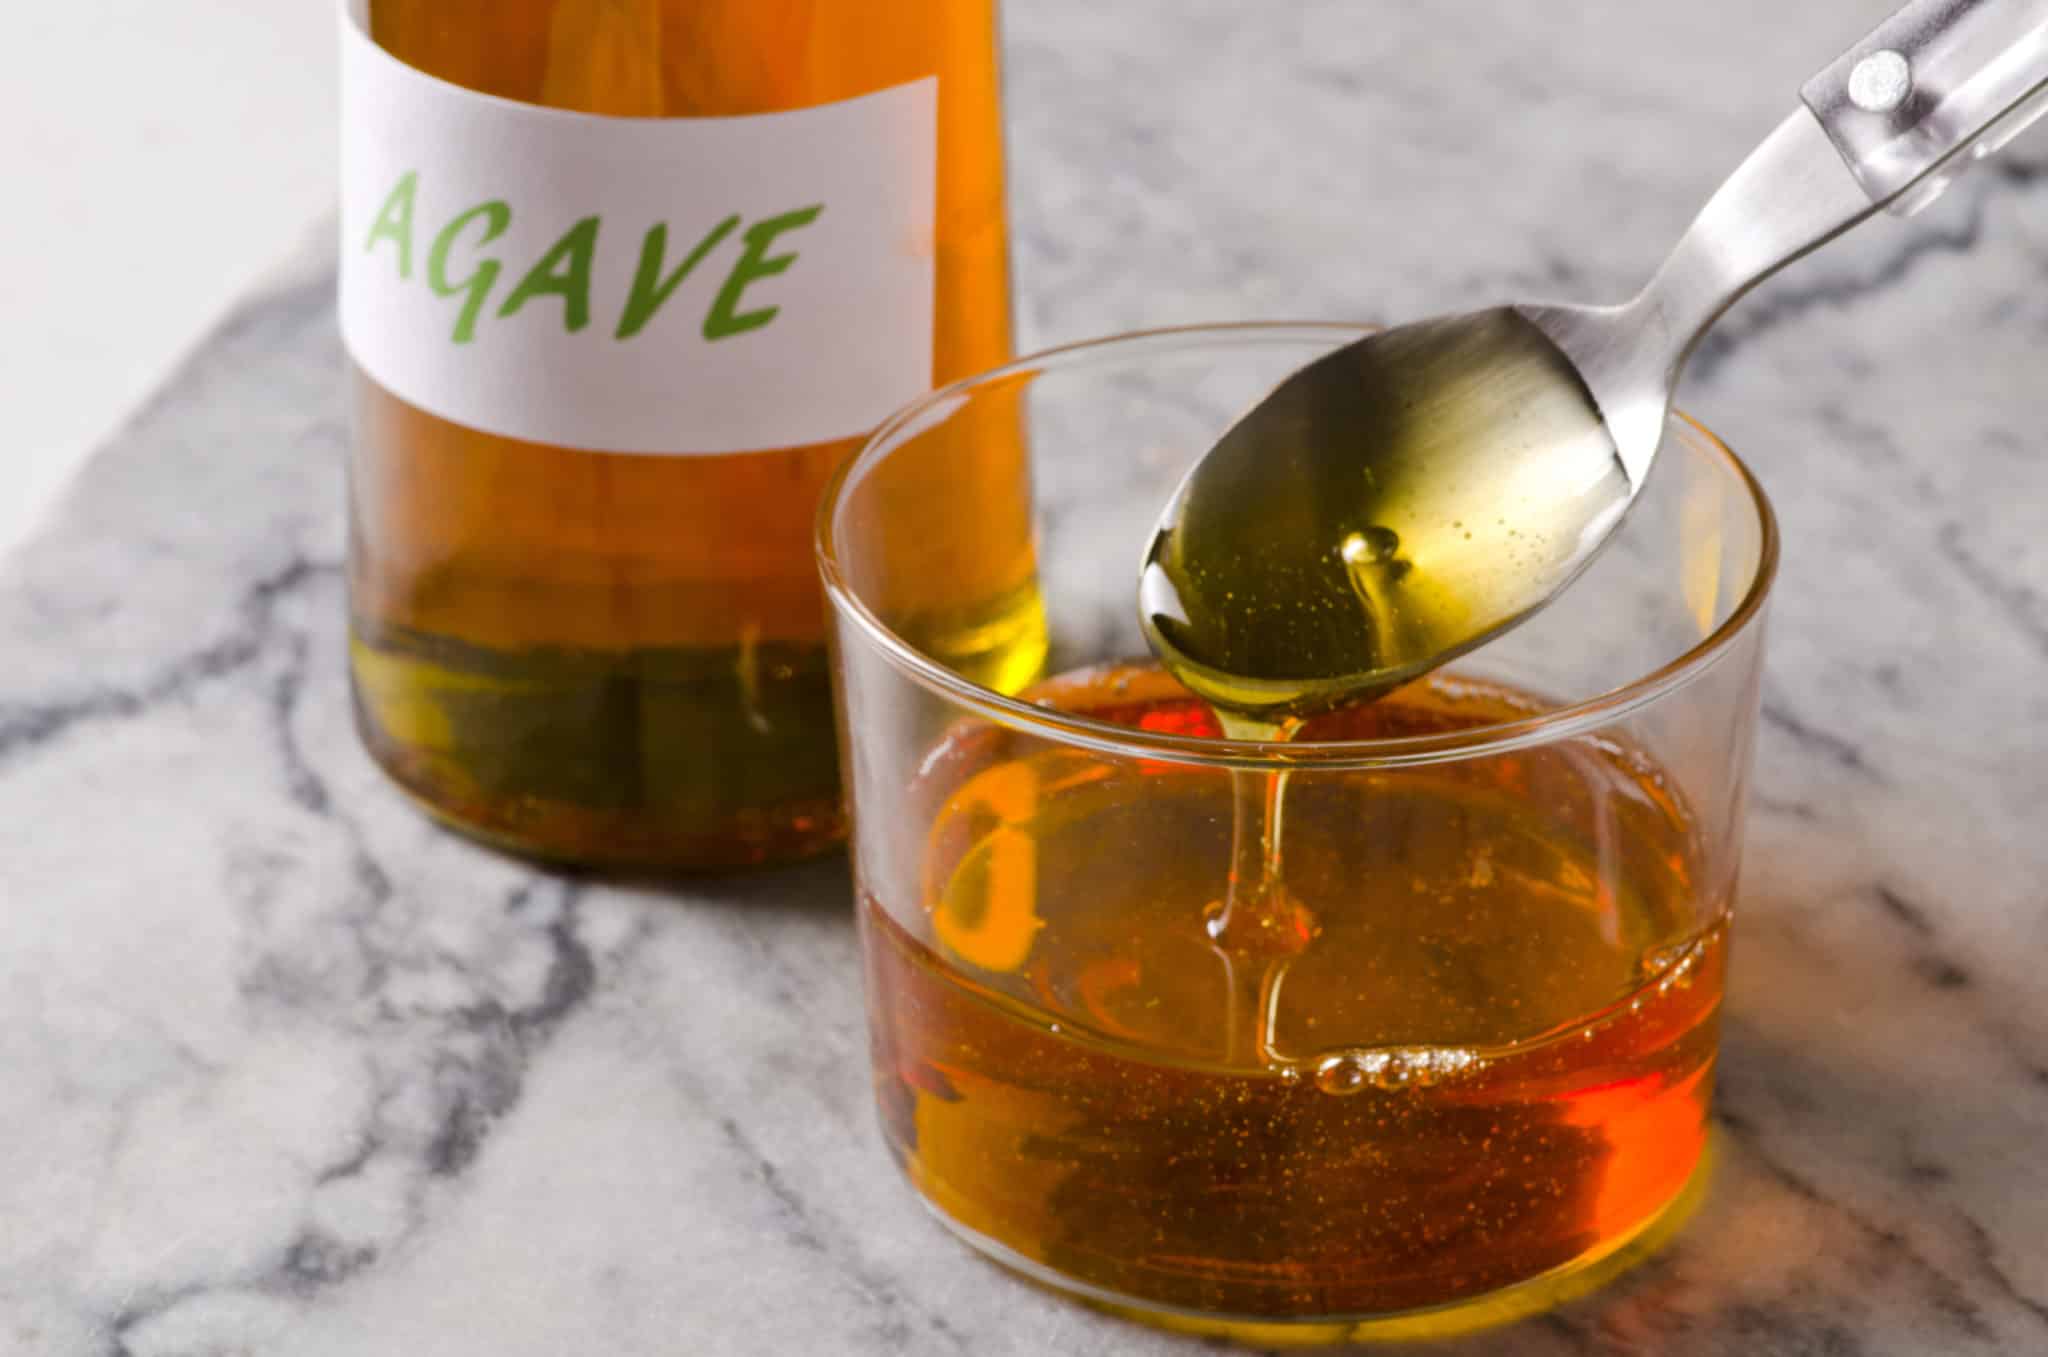 Agave syrup in glass with spoon